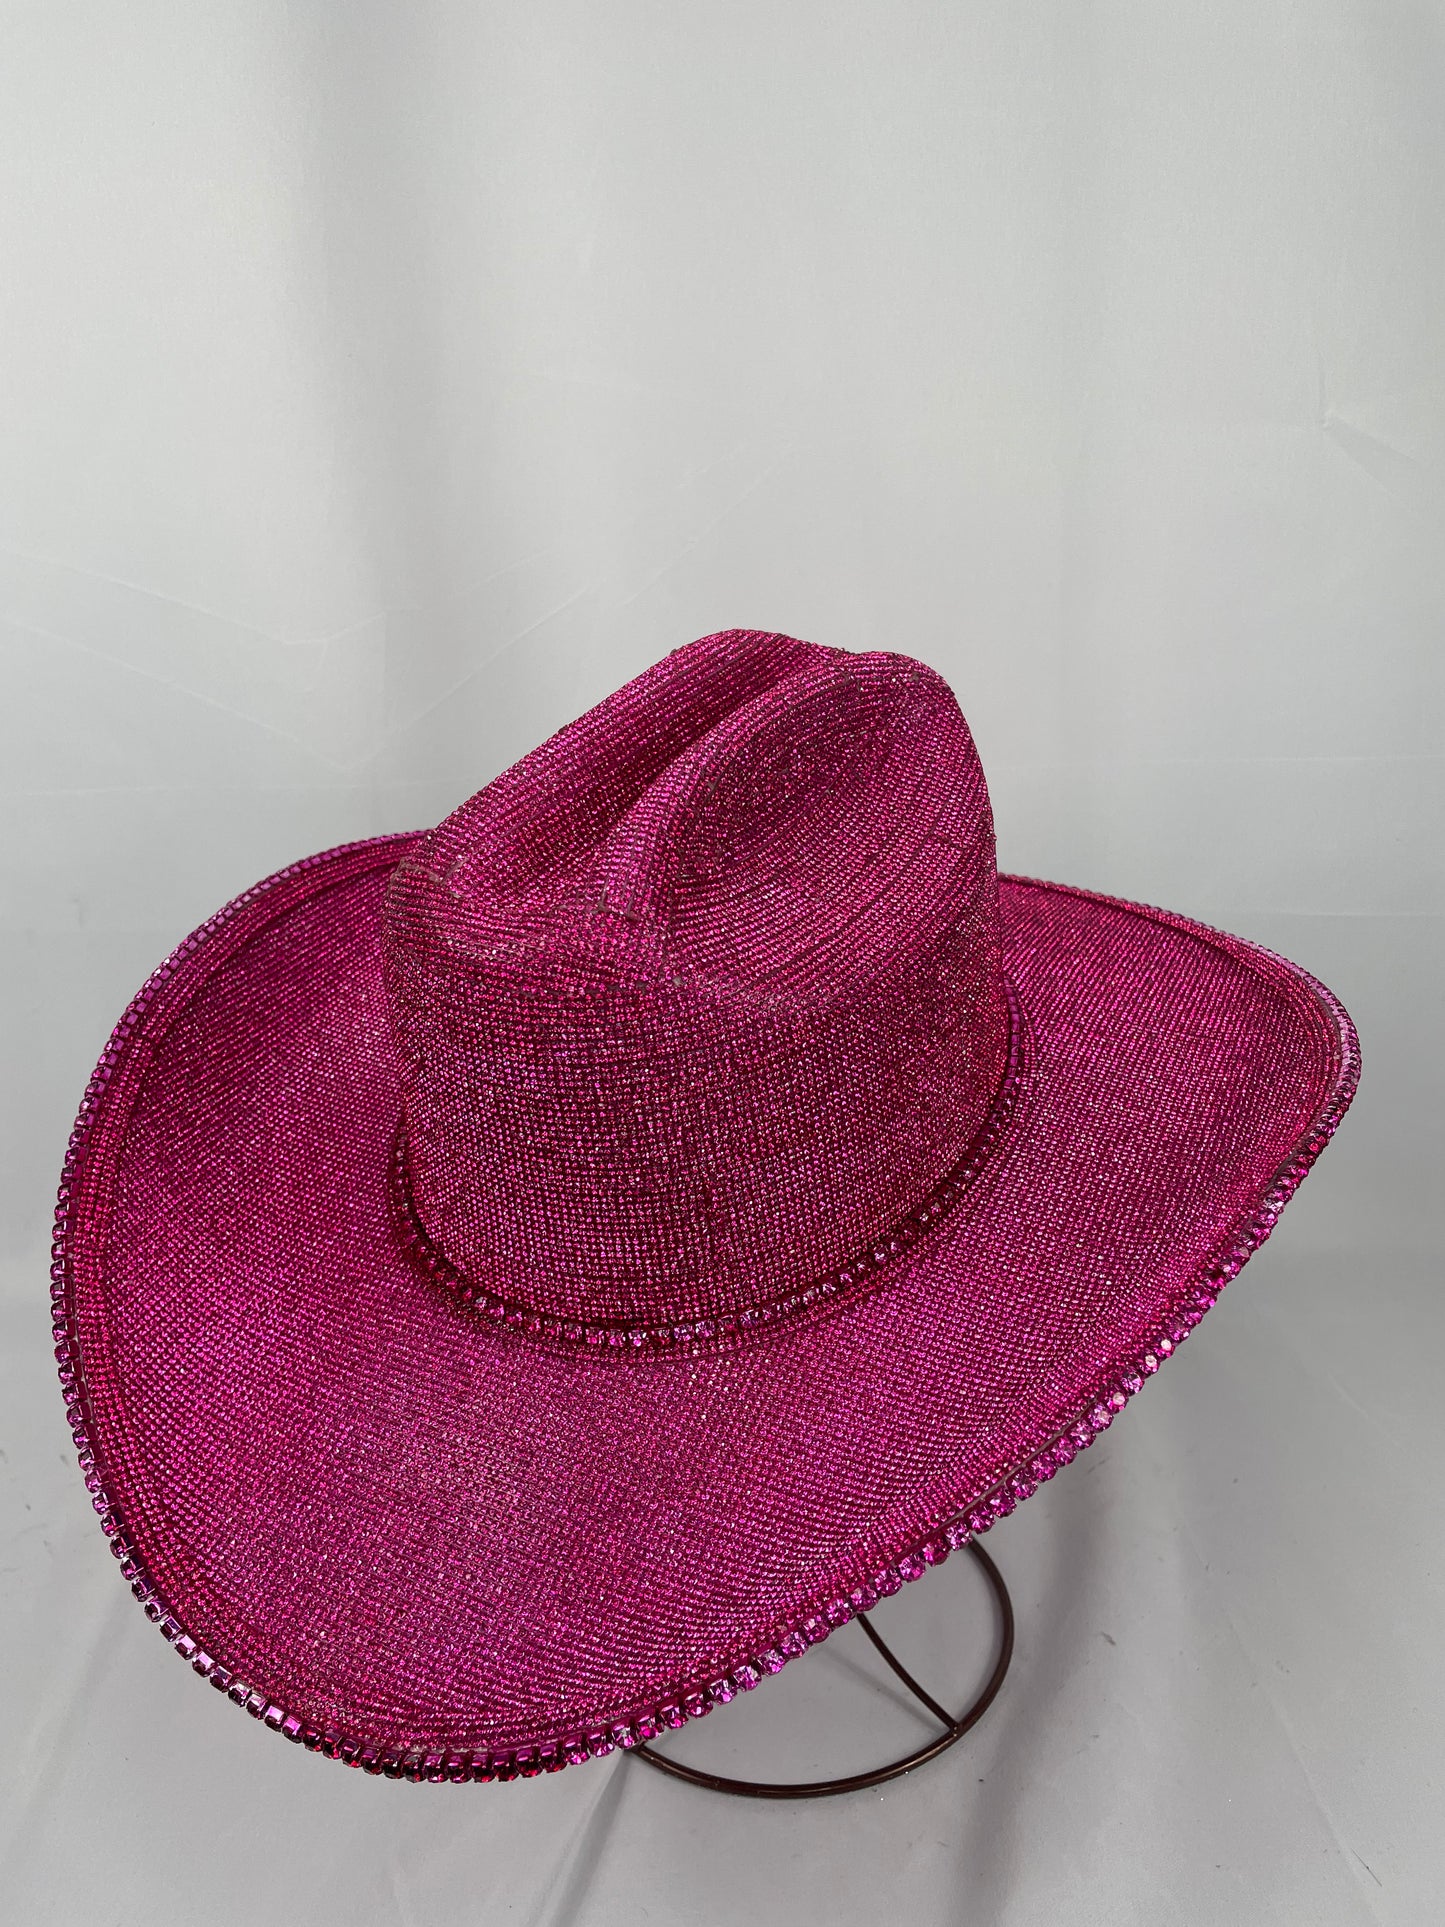 Barbie Let's Go Party Rhinestone Cowgirl Hat